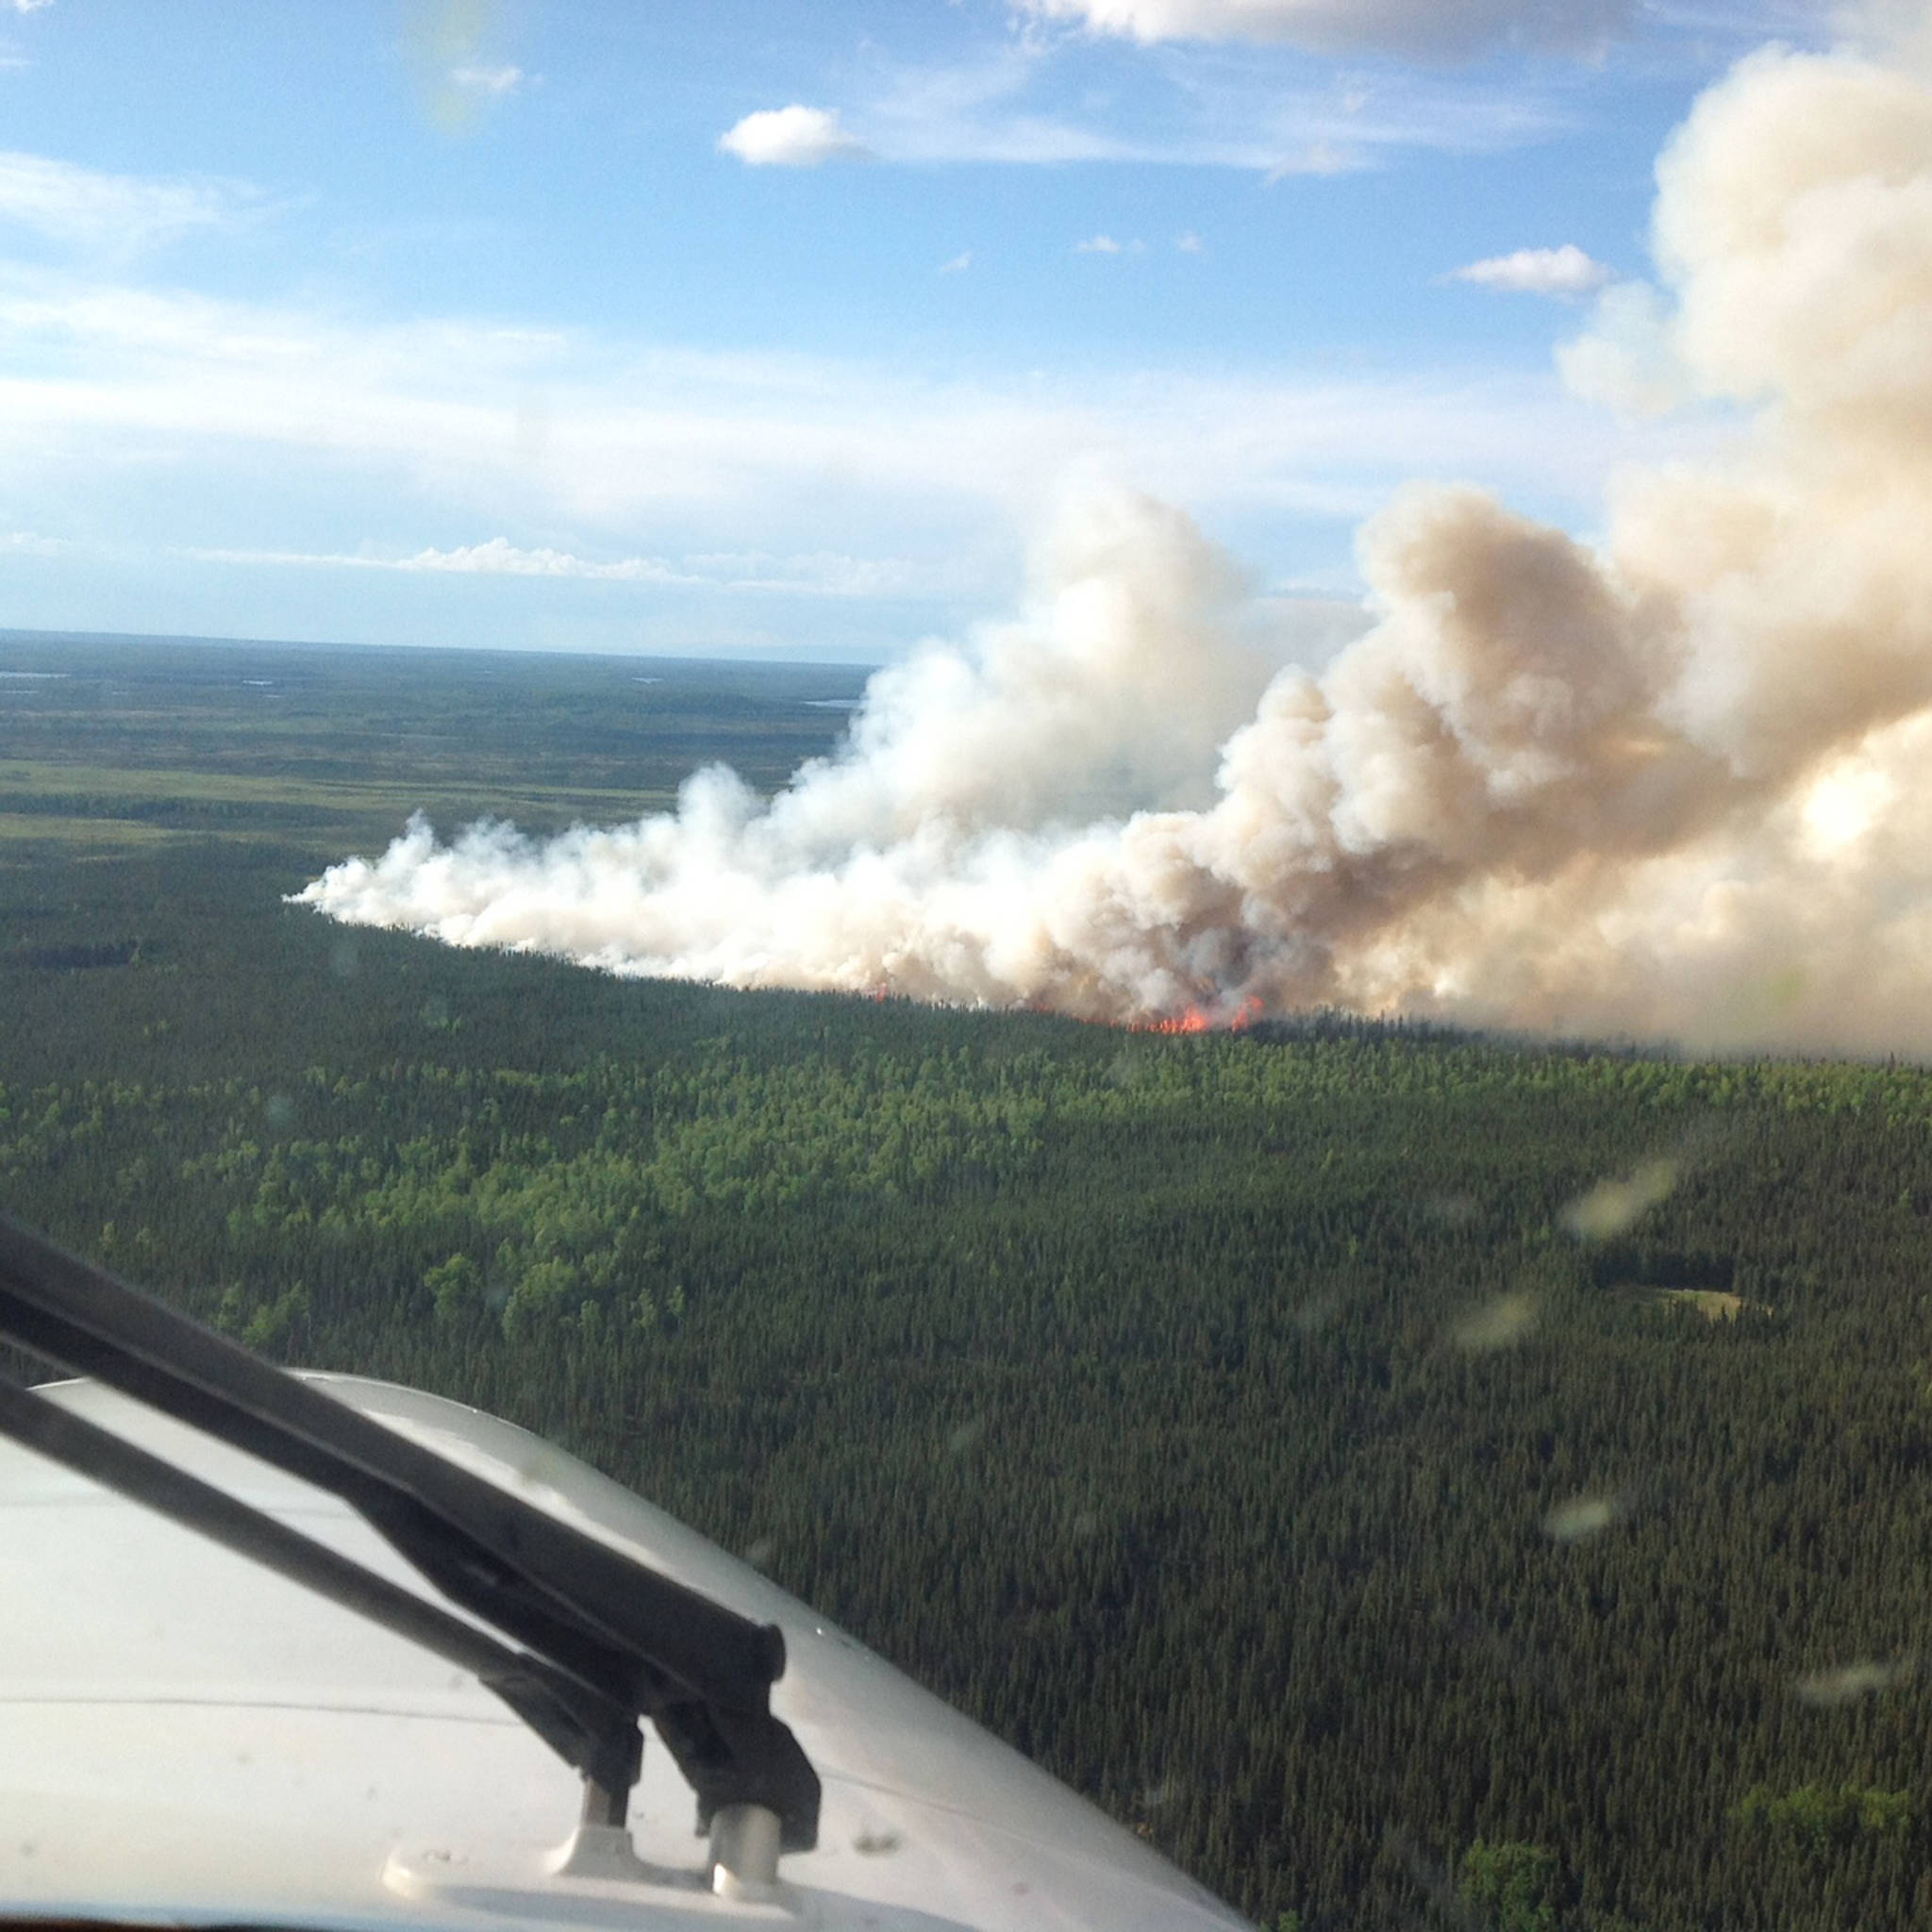 The Swan Lake wildfire burns in the Kenai National Wildlife Refuge as seen from the air Thursday, June 15, 2017 near Sterling, Alaska. The Alaska Division of Forestry estimated Thursday that the fire is 150 acres and burning 5-6 miles north of the Sterling Highway. (Photo courtesy Tim Mowry, Alaska Division of Forestry)